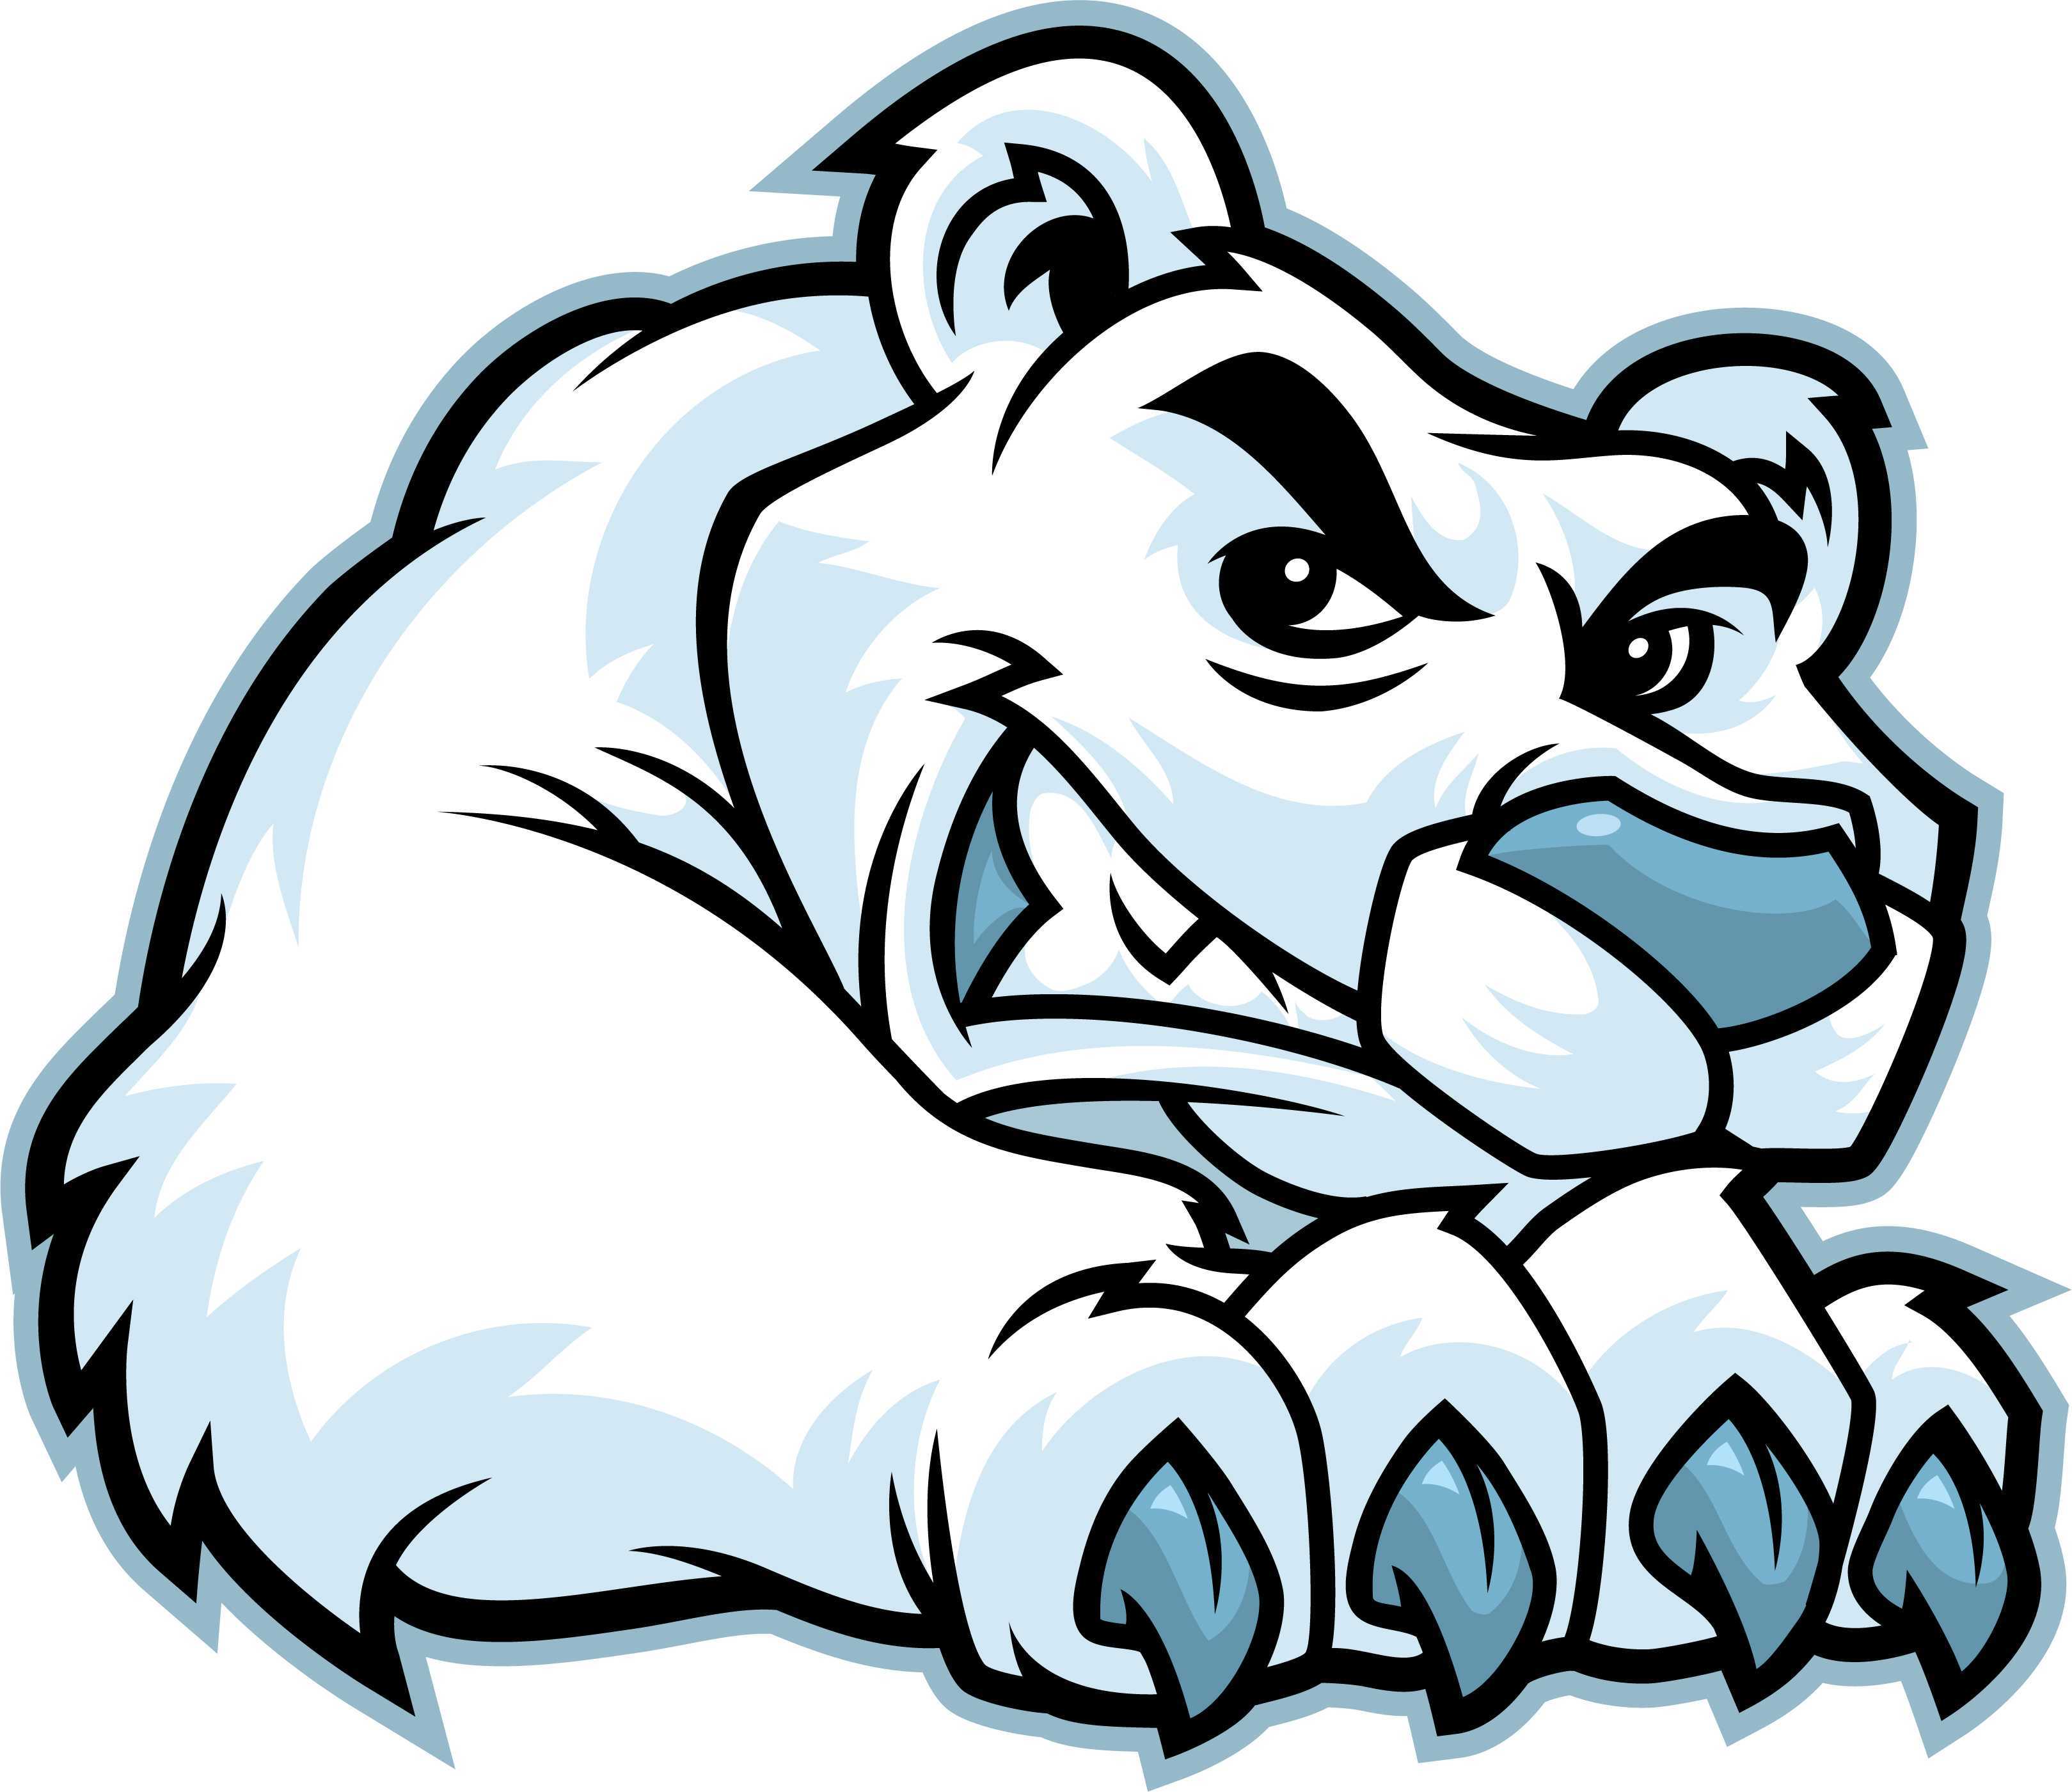 Free Bear Claw, Download Free Clip Art, Free Clip Art on.